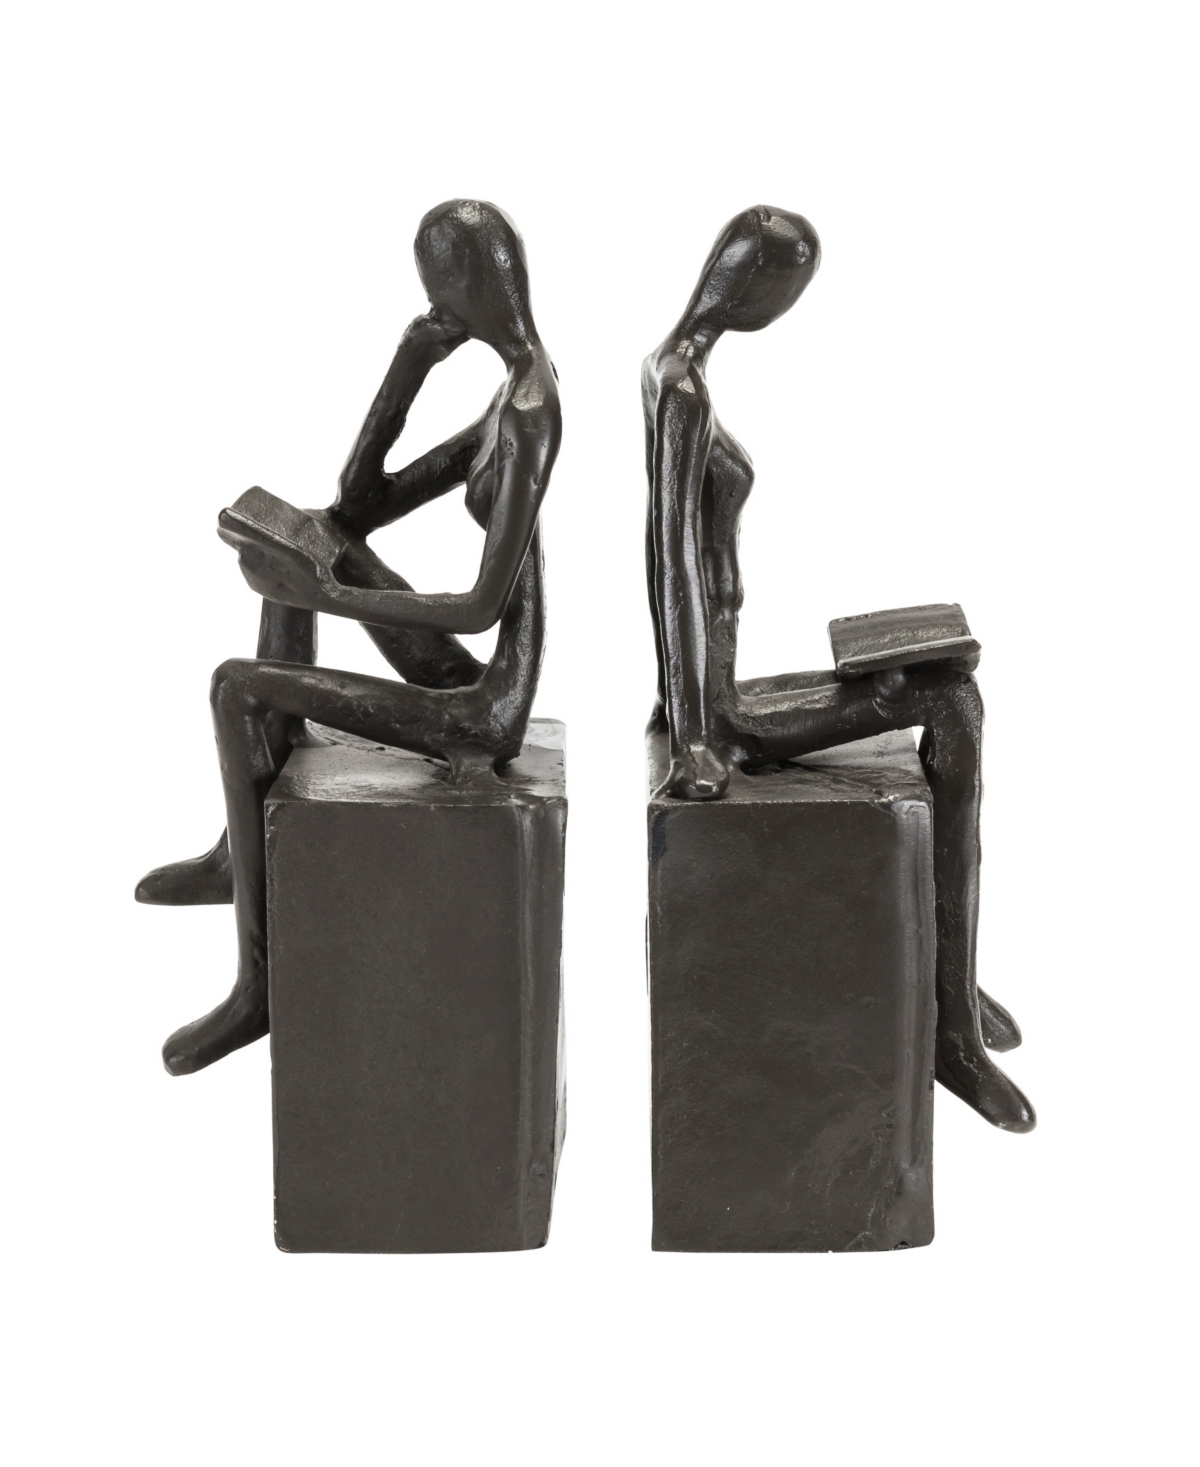 Danya B Man And Woman Reading On A Block Cast Iron Bookend Set In Dark Brown